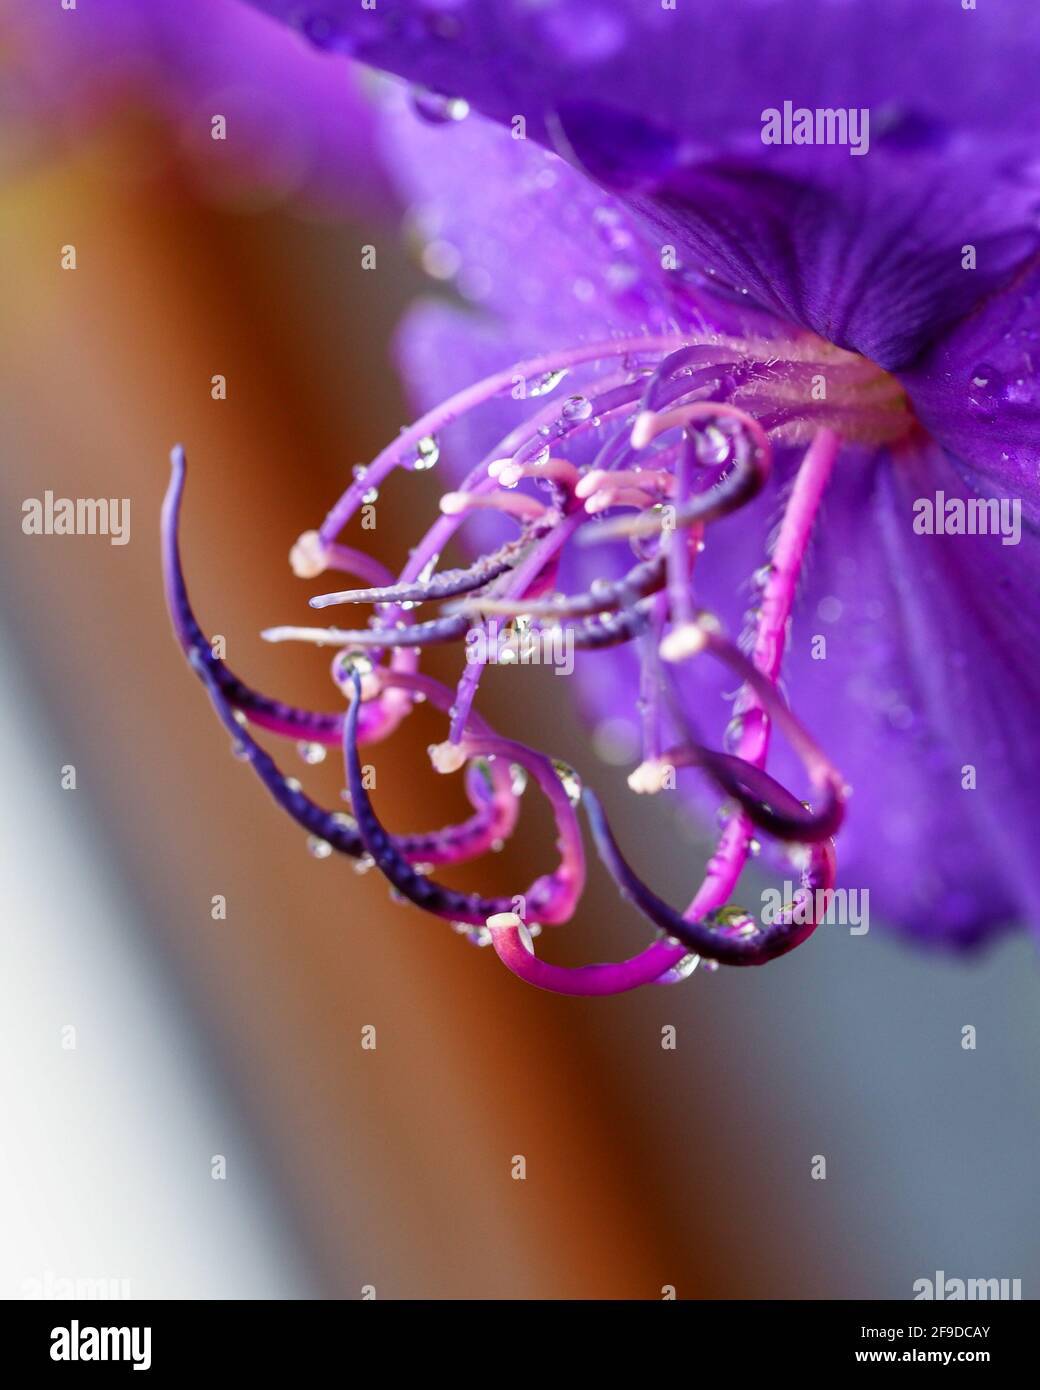 Water drops on flowers, macro of a tangled mess of curly stamens of a purple Tibouchina flower covered in raindrops, Australian coastal garden Stock Photo